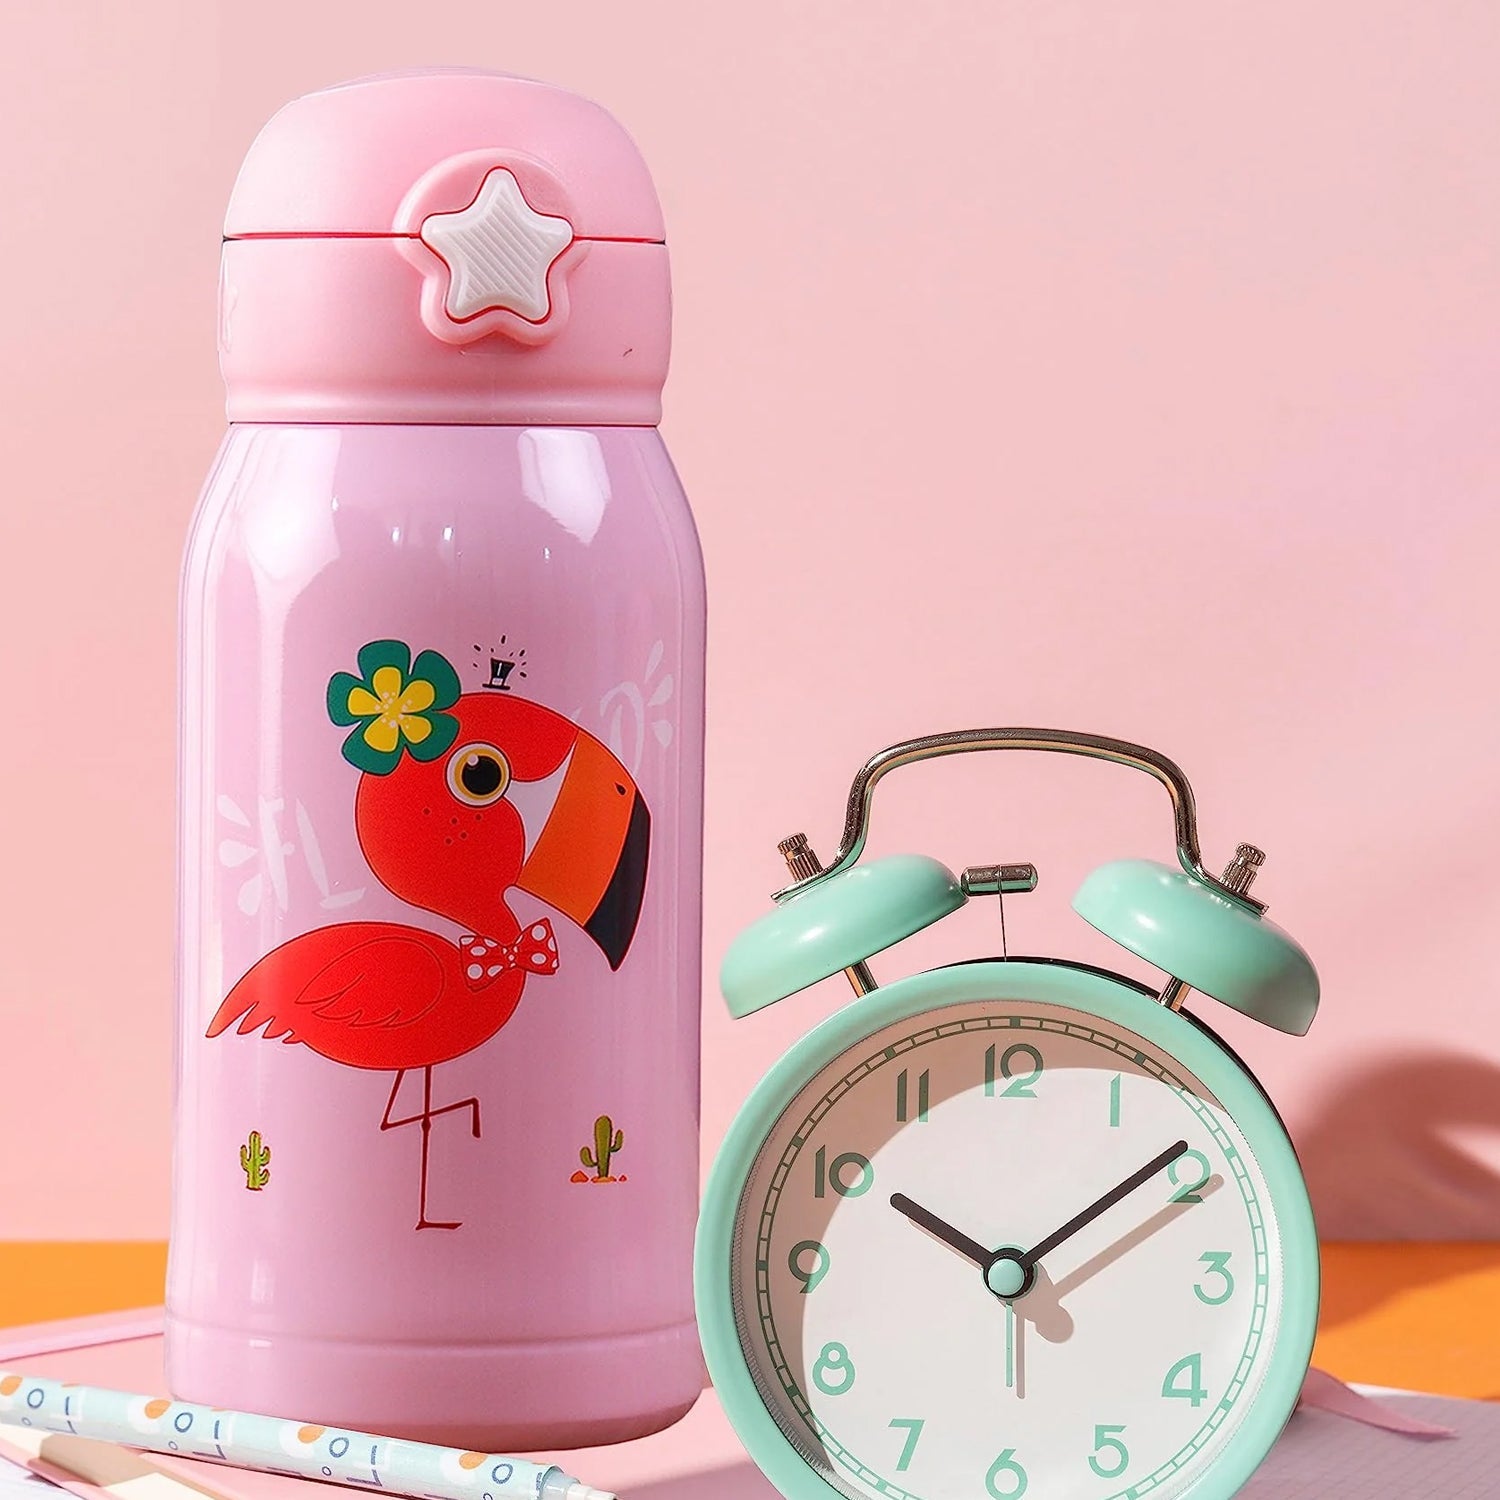 Love Baby Cute Animals Prints Kids Bottle Sipper for HOT N Cold Water, Milk, Juice with Bottle Cover, Cup, Zip Pocket & Straw to Keep Things Orange Green Pink Colors for Outdoor/ Office/Gym/School (600 ML)